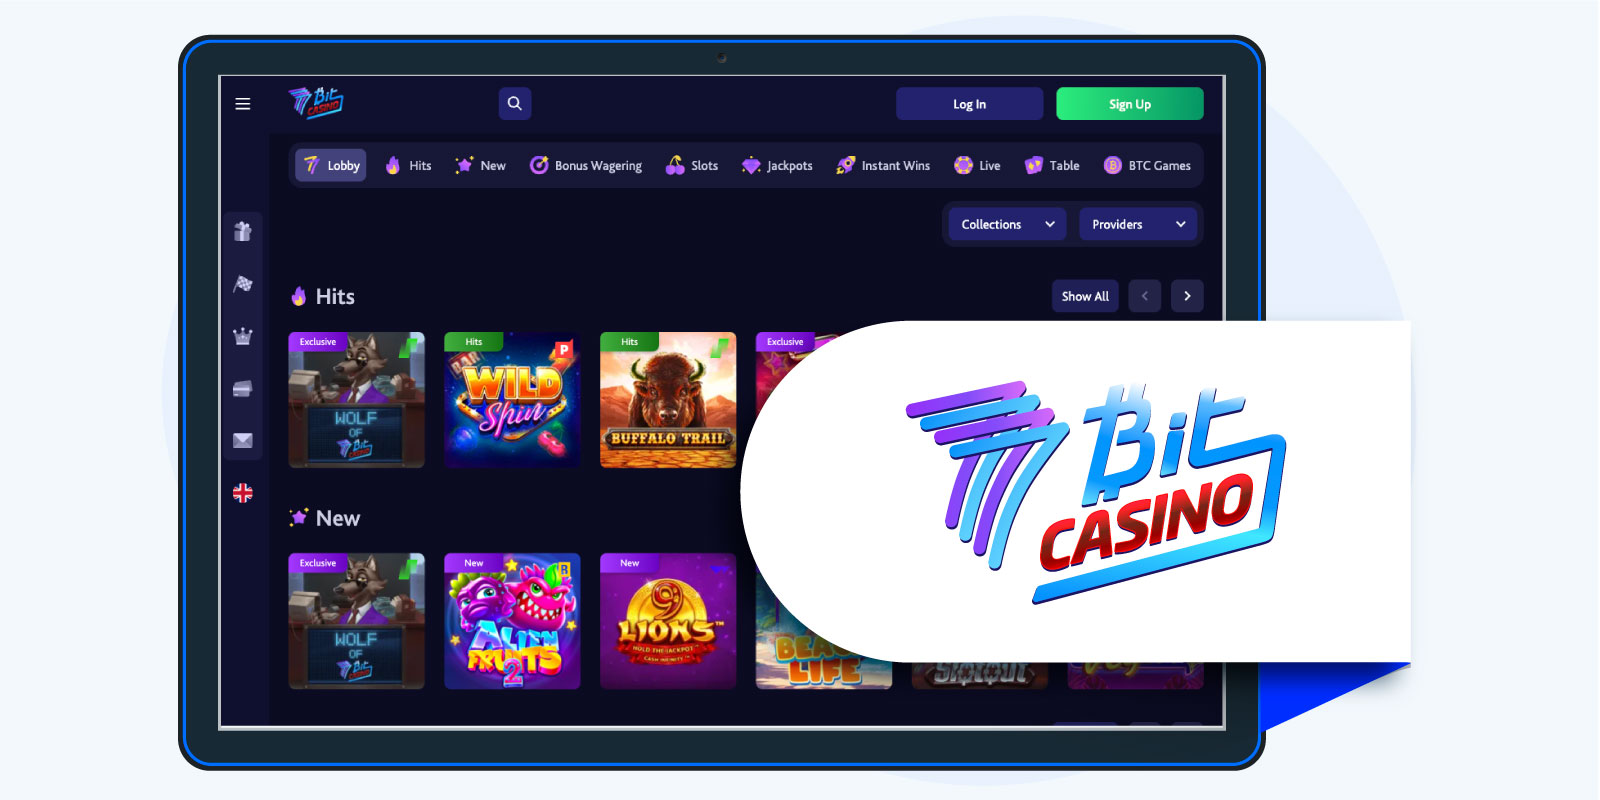 7-Bit Casino - Best Online Casino for Cryptocurrency Users in New Zealand